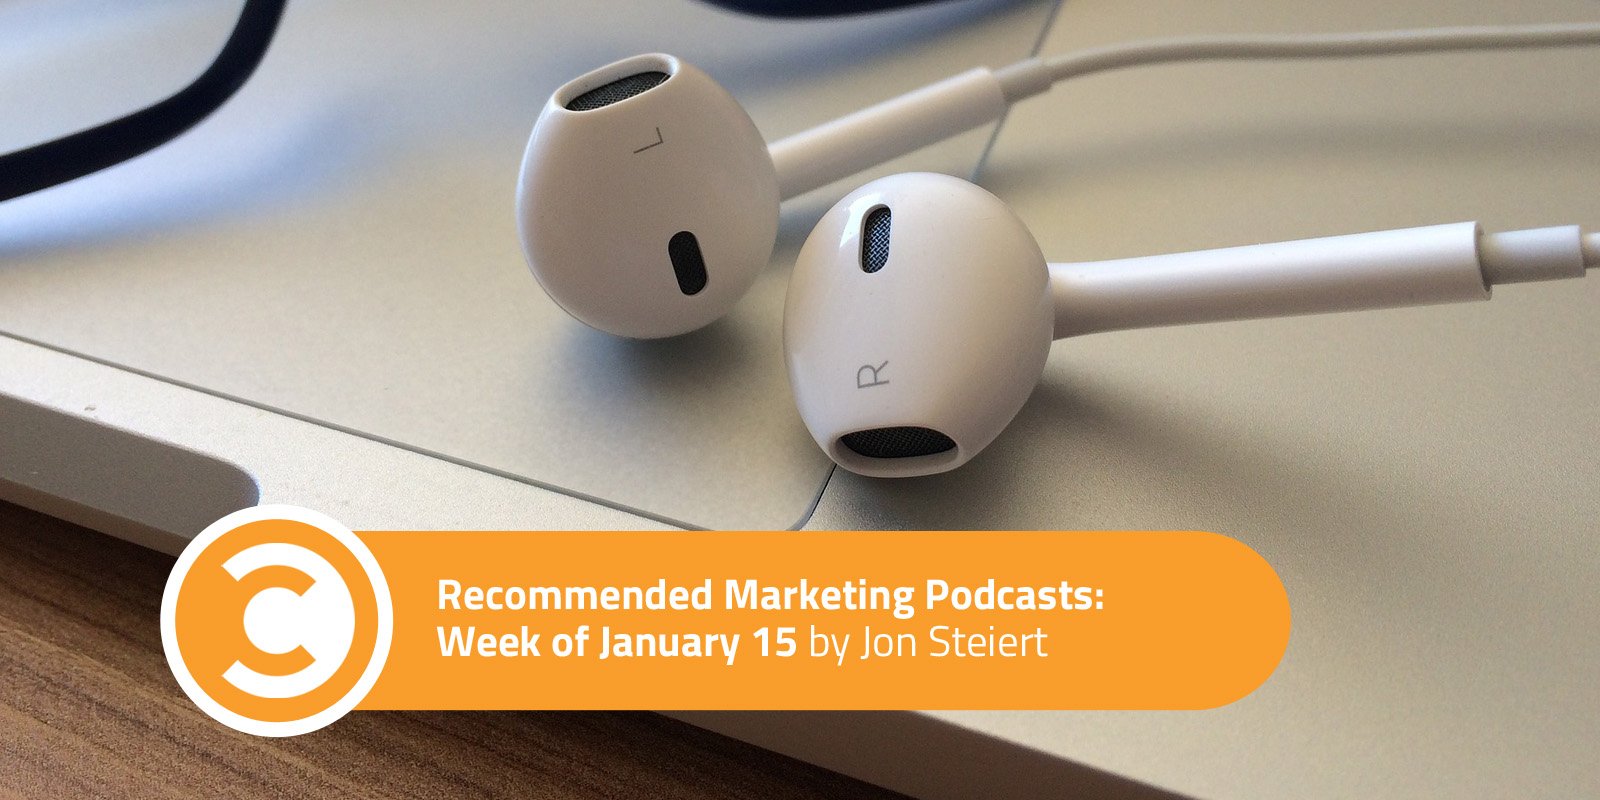 Recommended Marketing Podcasts Week of January 15